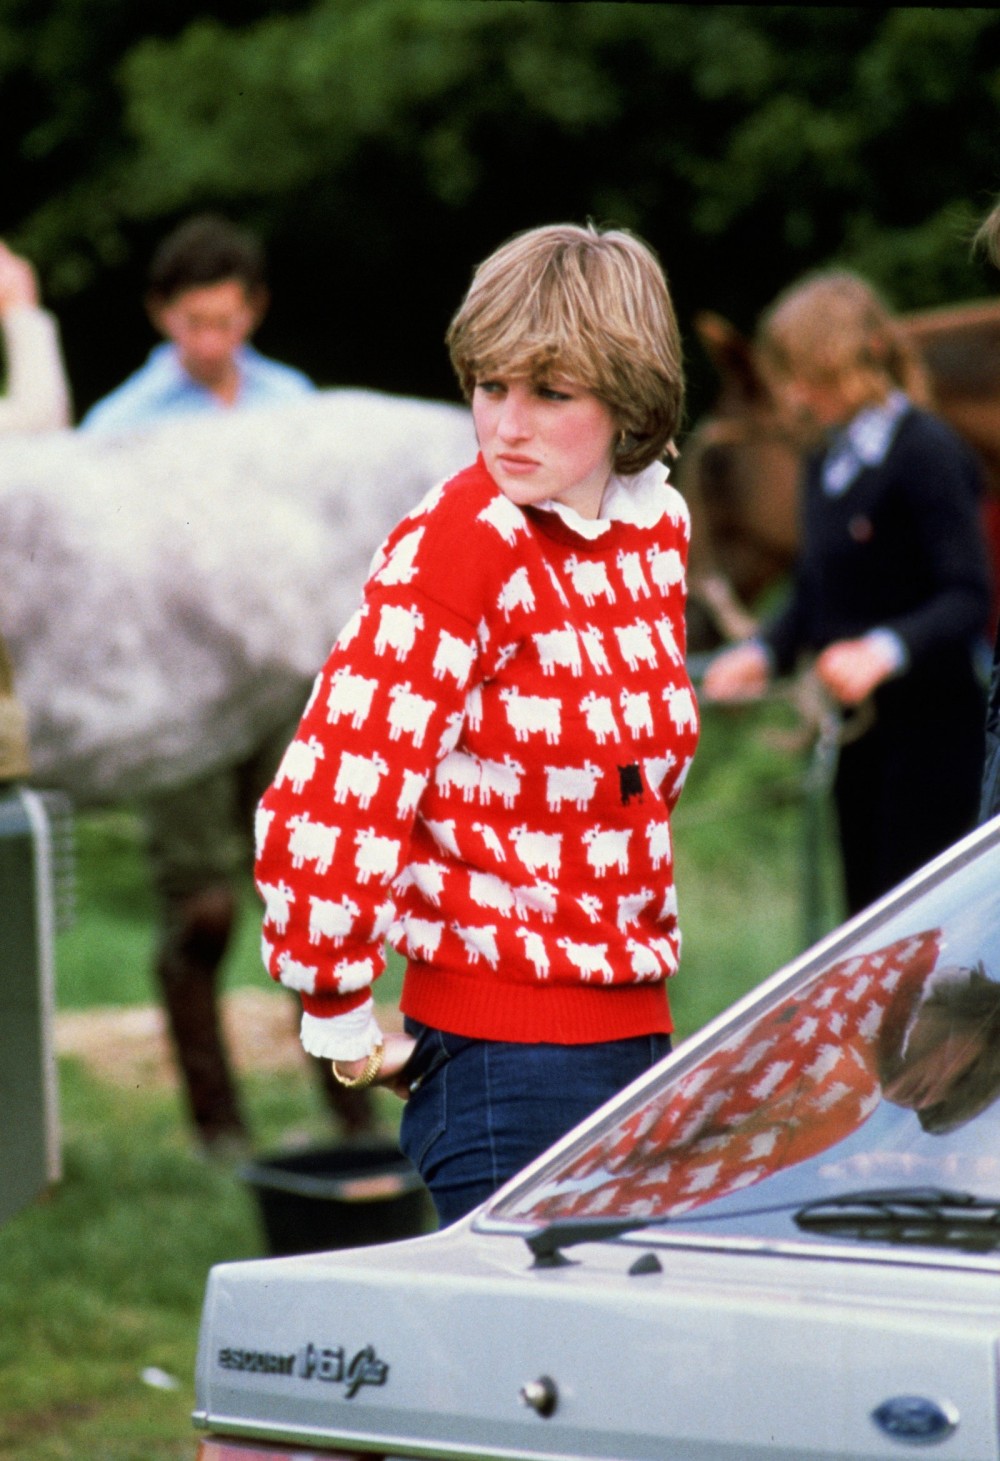 Princess Diana wearing 'Black sheep' sweater by Warm and Wonderful to a polo match in 1980.